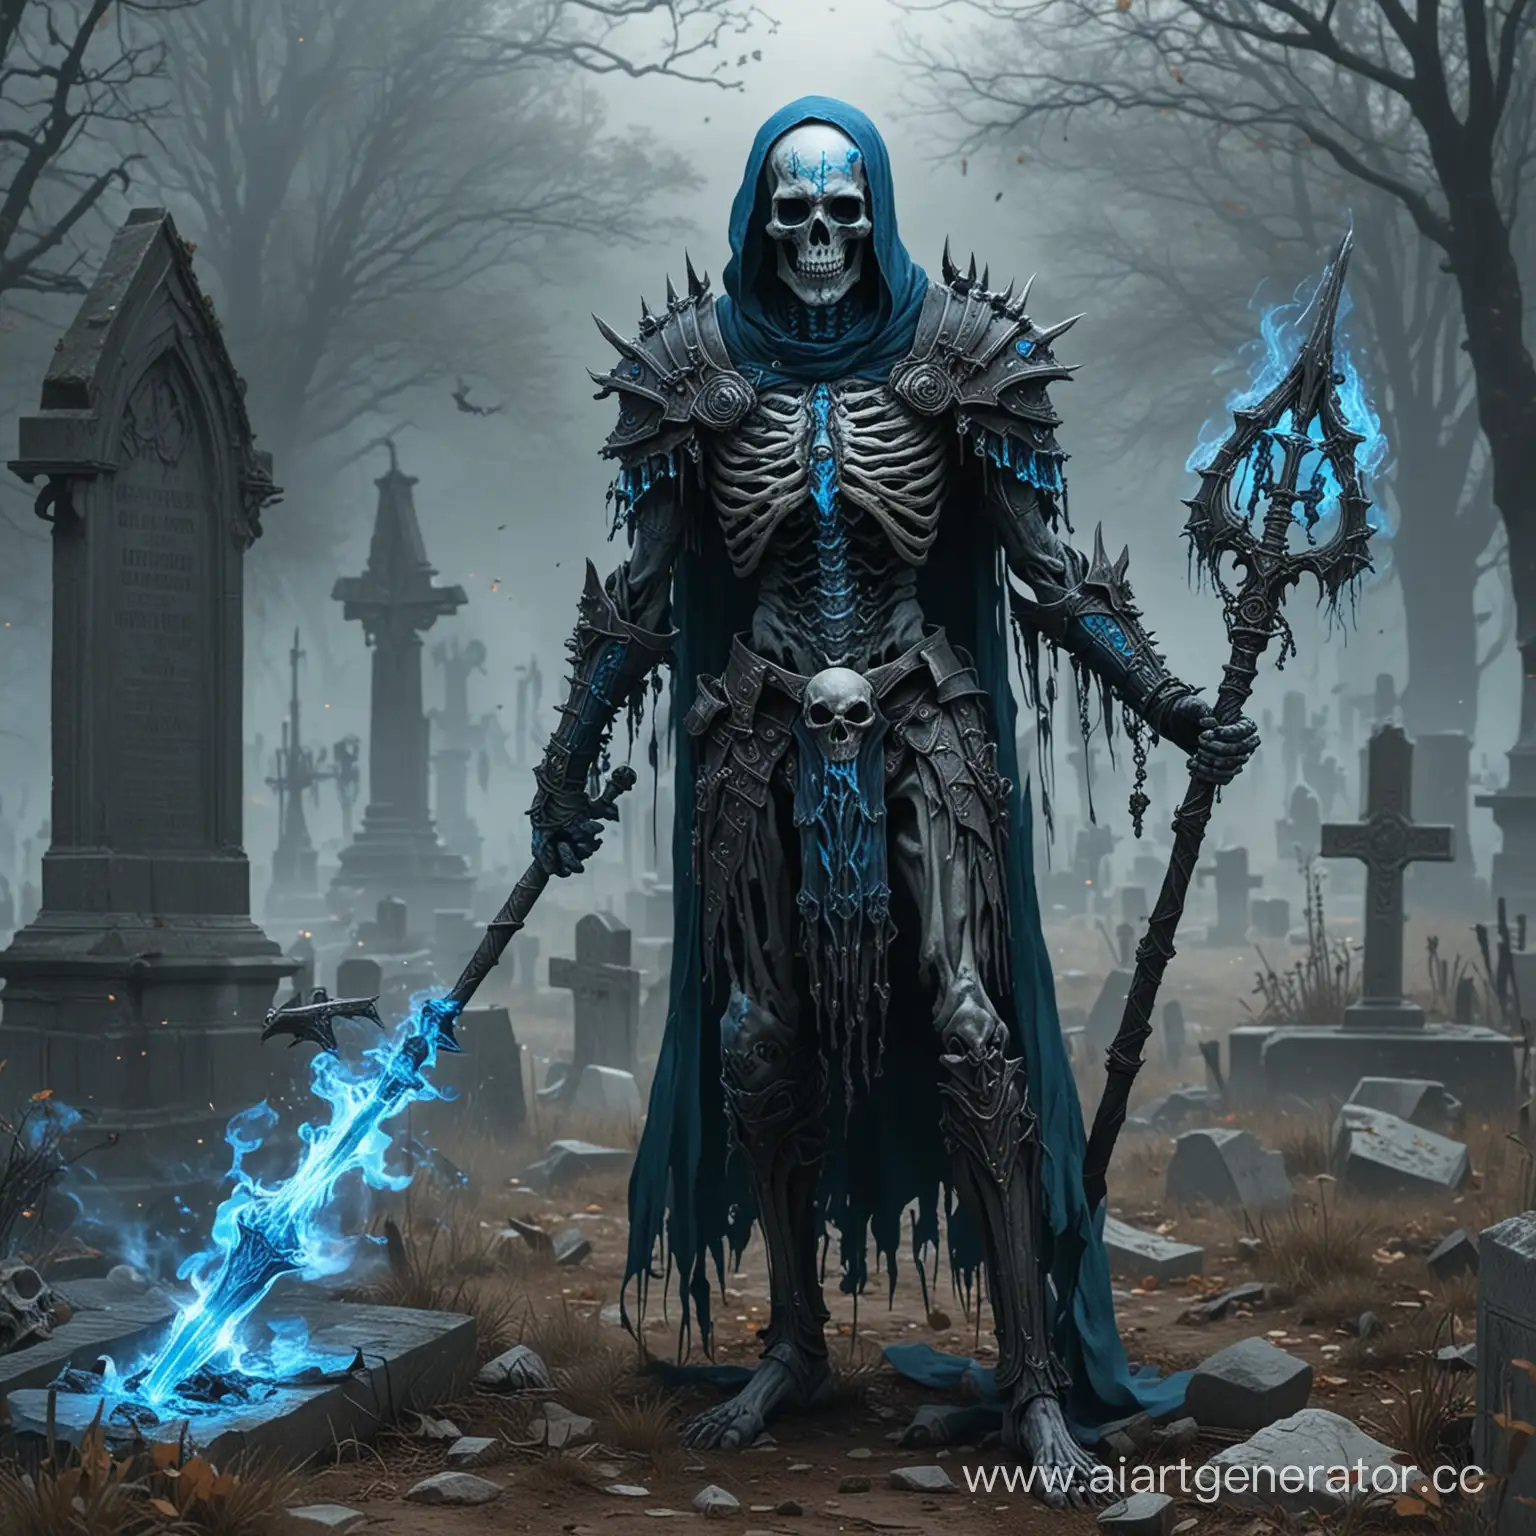 Necromancer-Conjuring-Skeletons-in-a-Haunted-Cemetery-with-Enchanted-Blue-Flames